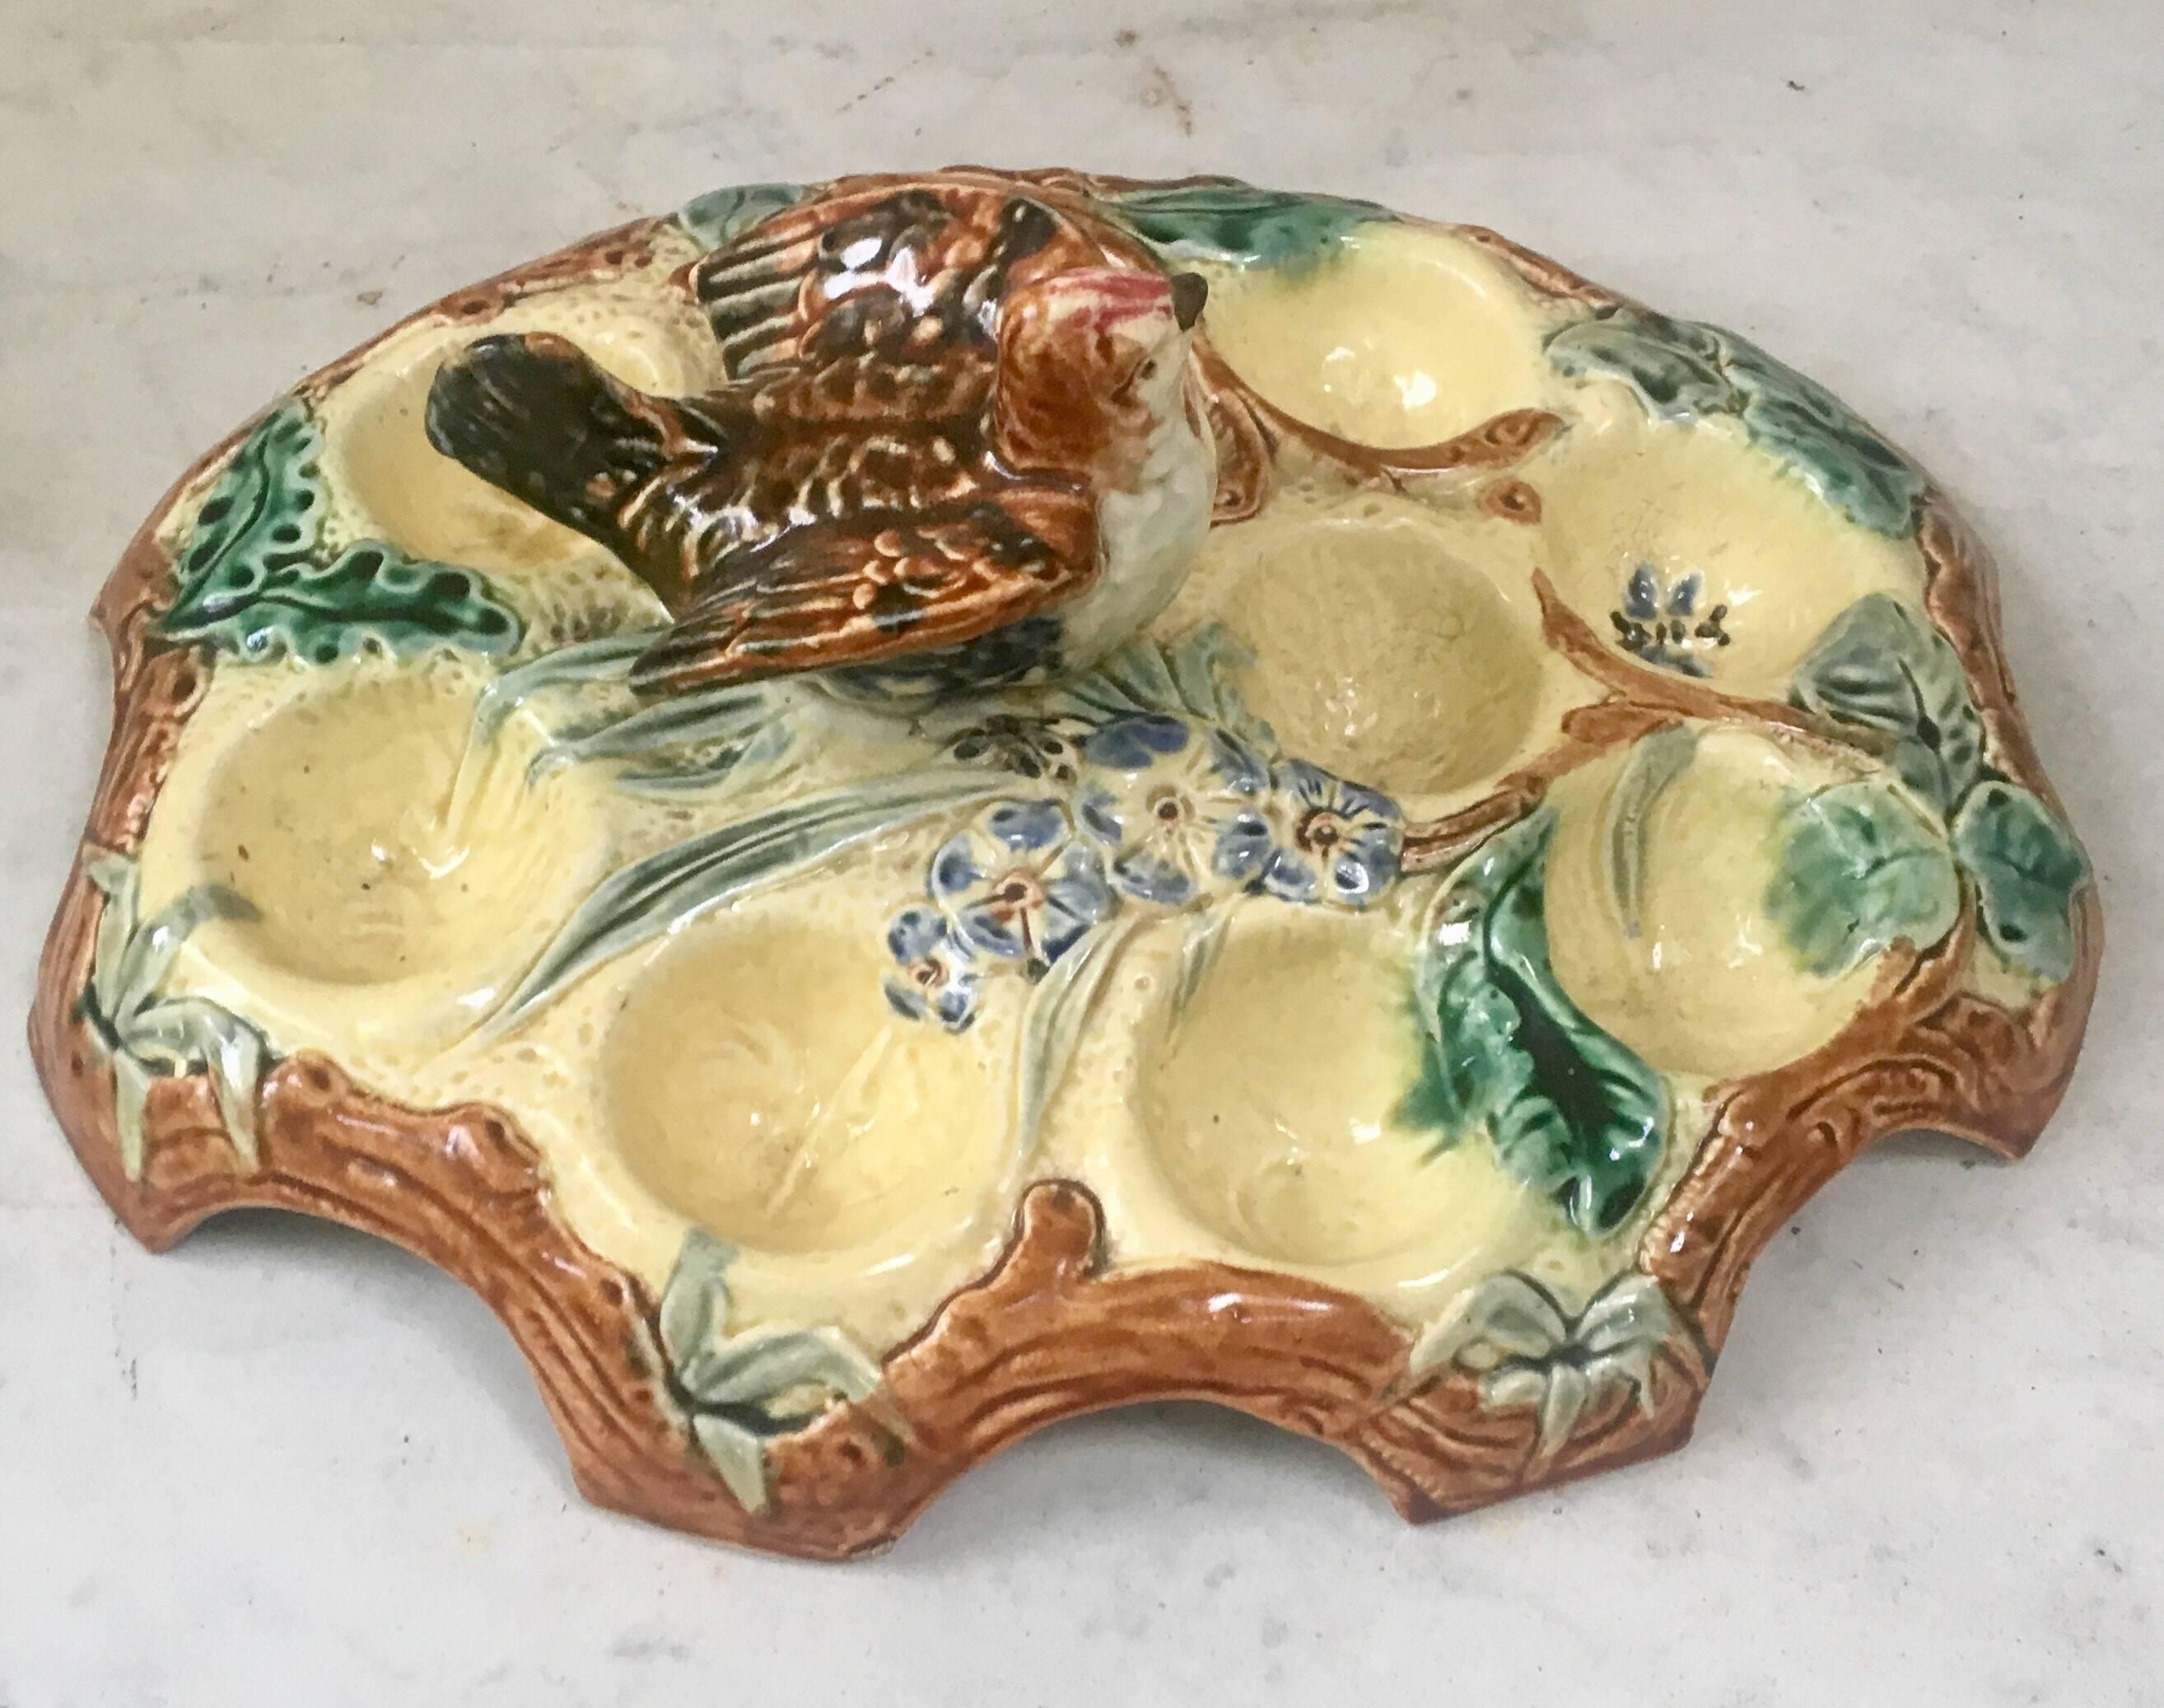 Belgium Majolica egg plate with bird handle for nine eggs decorated with flowers, butterfly and leaves, circa 1880.